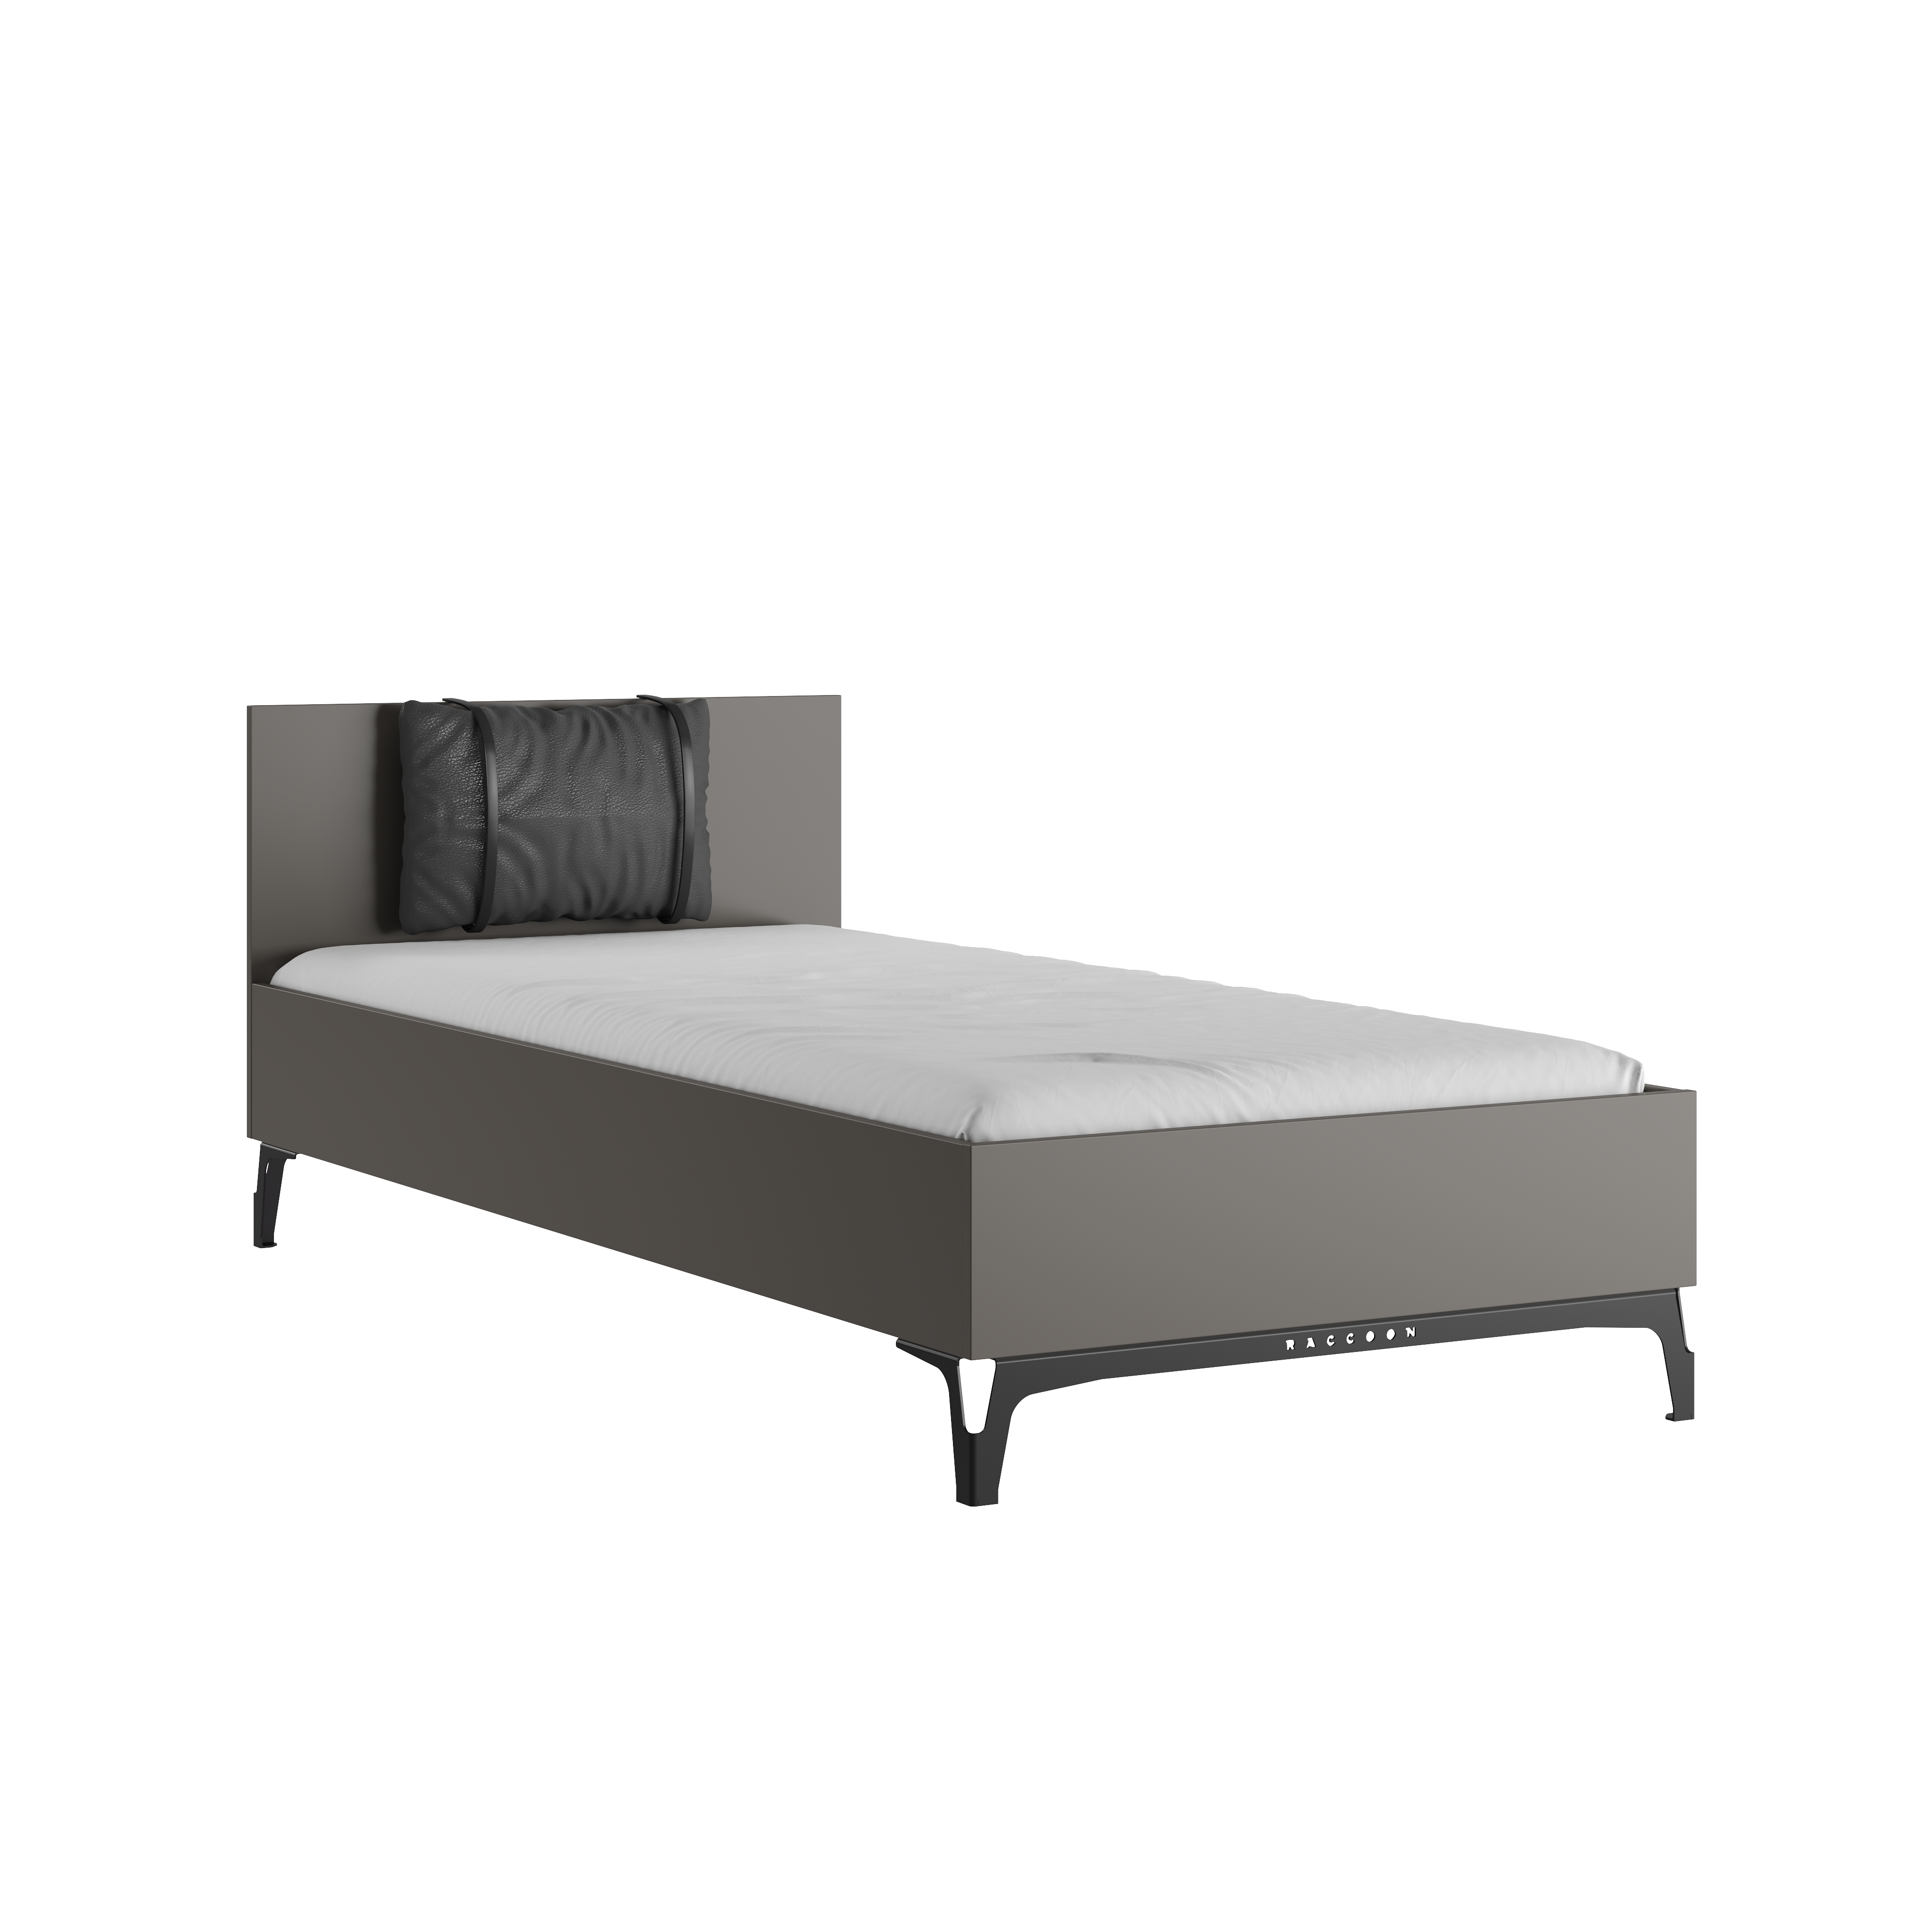 TOMI™ ENERGY Bed For Gaming Room